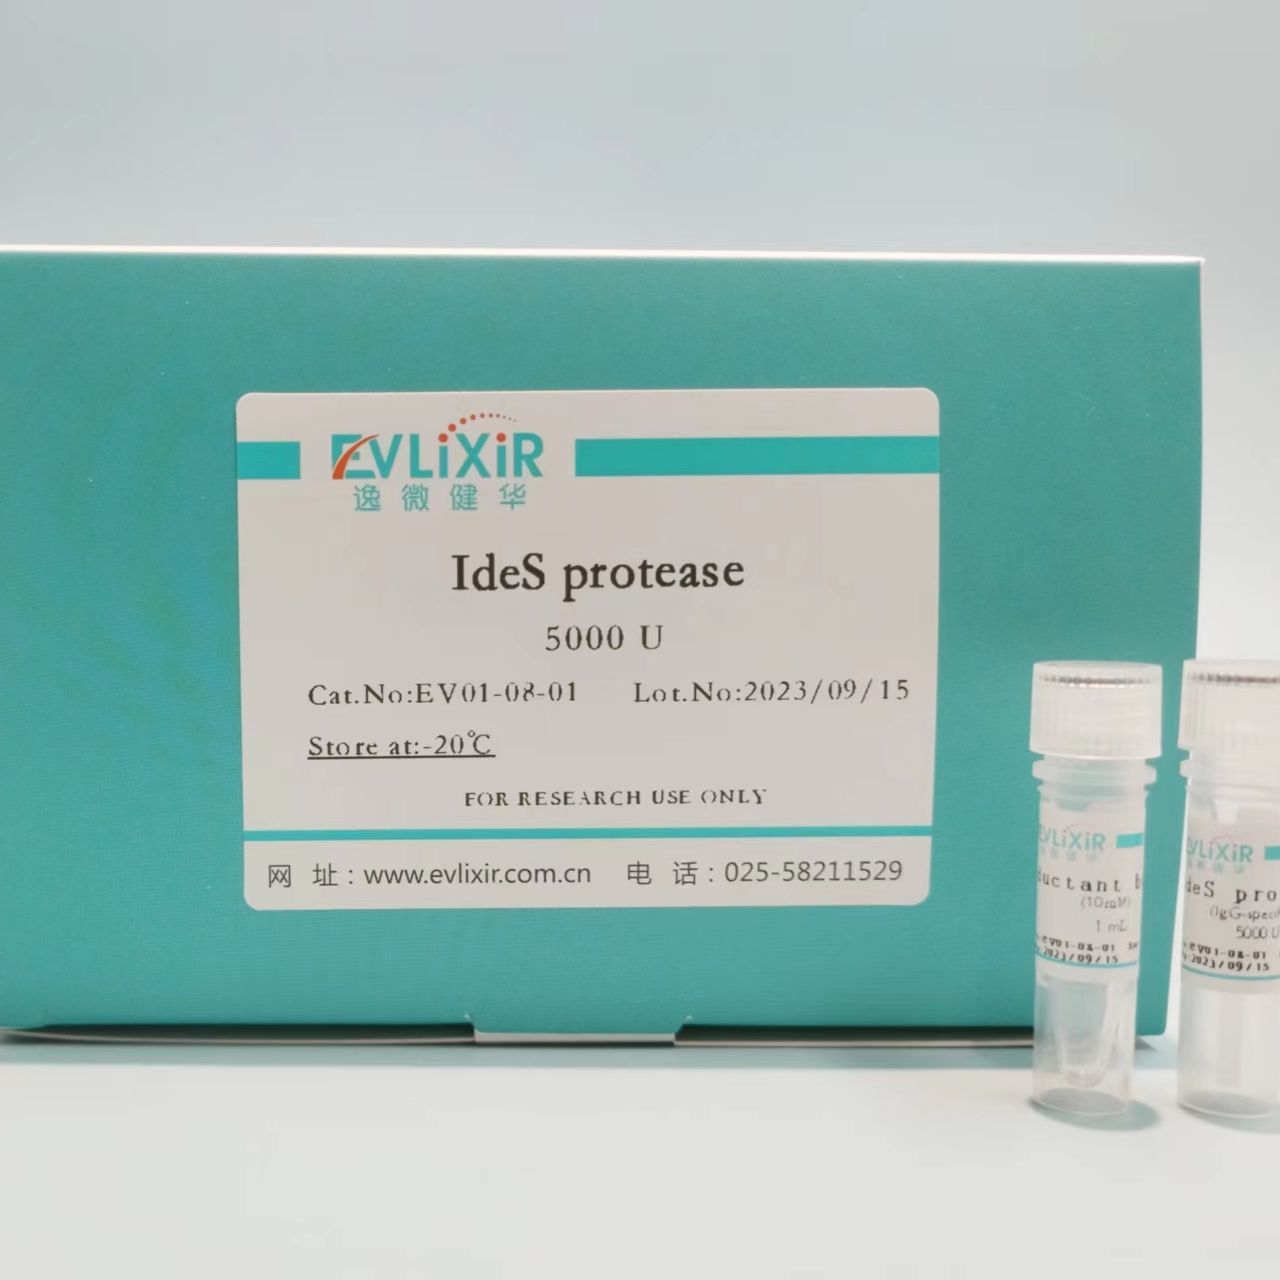 IdeS Protease (IgG-specific)